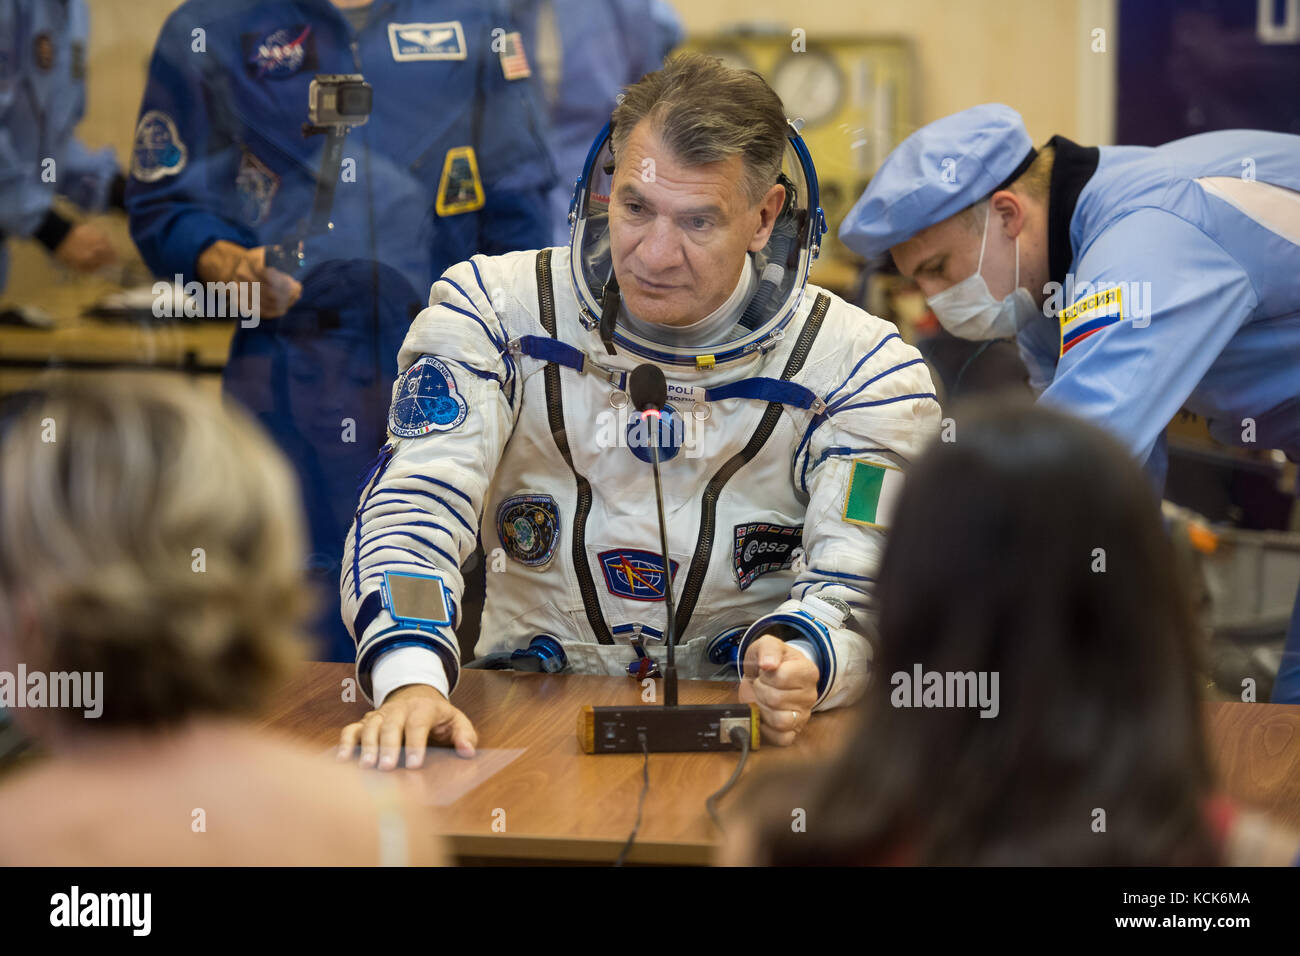 NASA International Space Station Expedition 52 prime crew member Italian astronaut Paolo Nespoli of the European Space Agency speaks to family and friends after having his Sokol spacesuit pressure checked in preparation for the Soyuz MS-05 launch at the Baikonur Cosmodrome July 28, 2017 in Baikonur, Kazakhstan.  (photo by Joel Kowsky  via Planetpix) Stock Photo